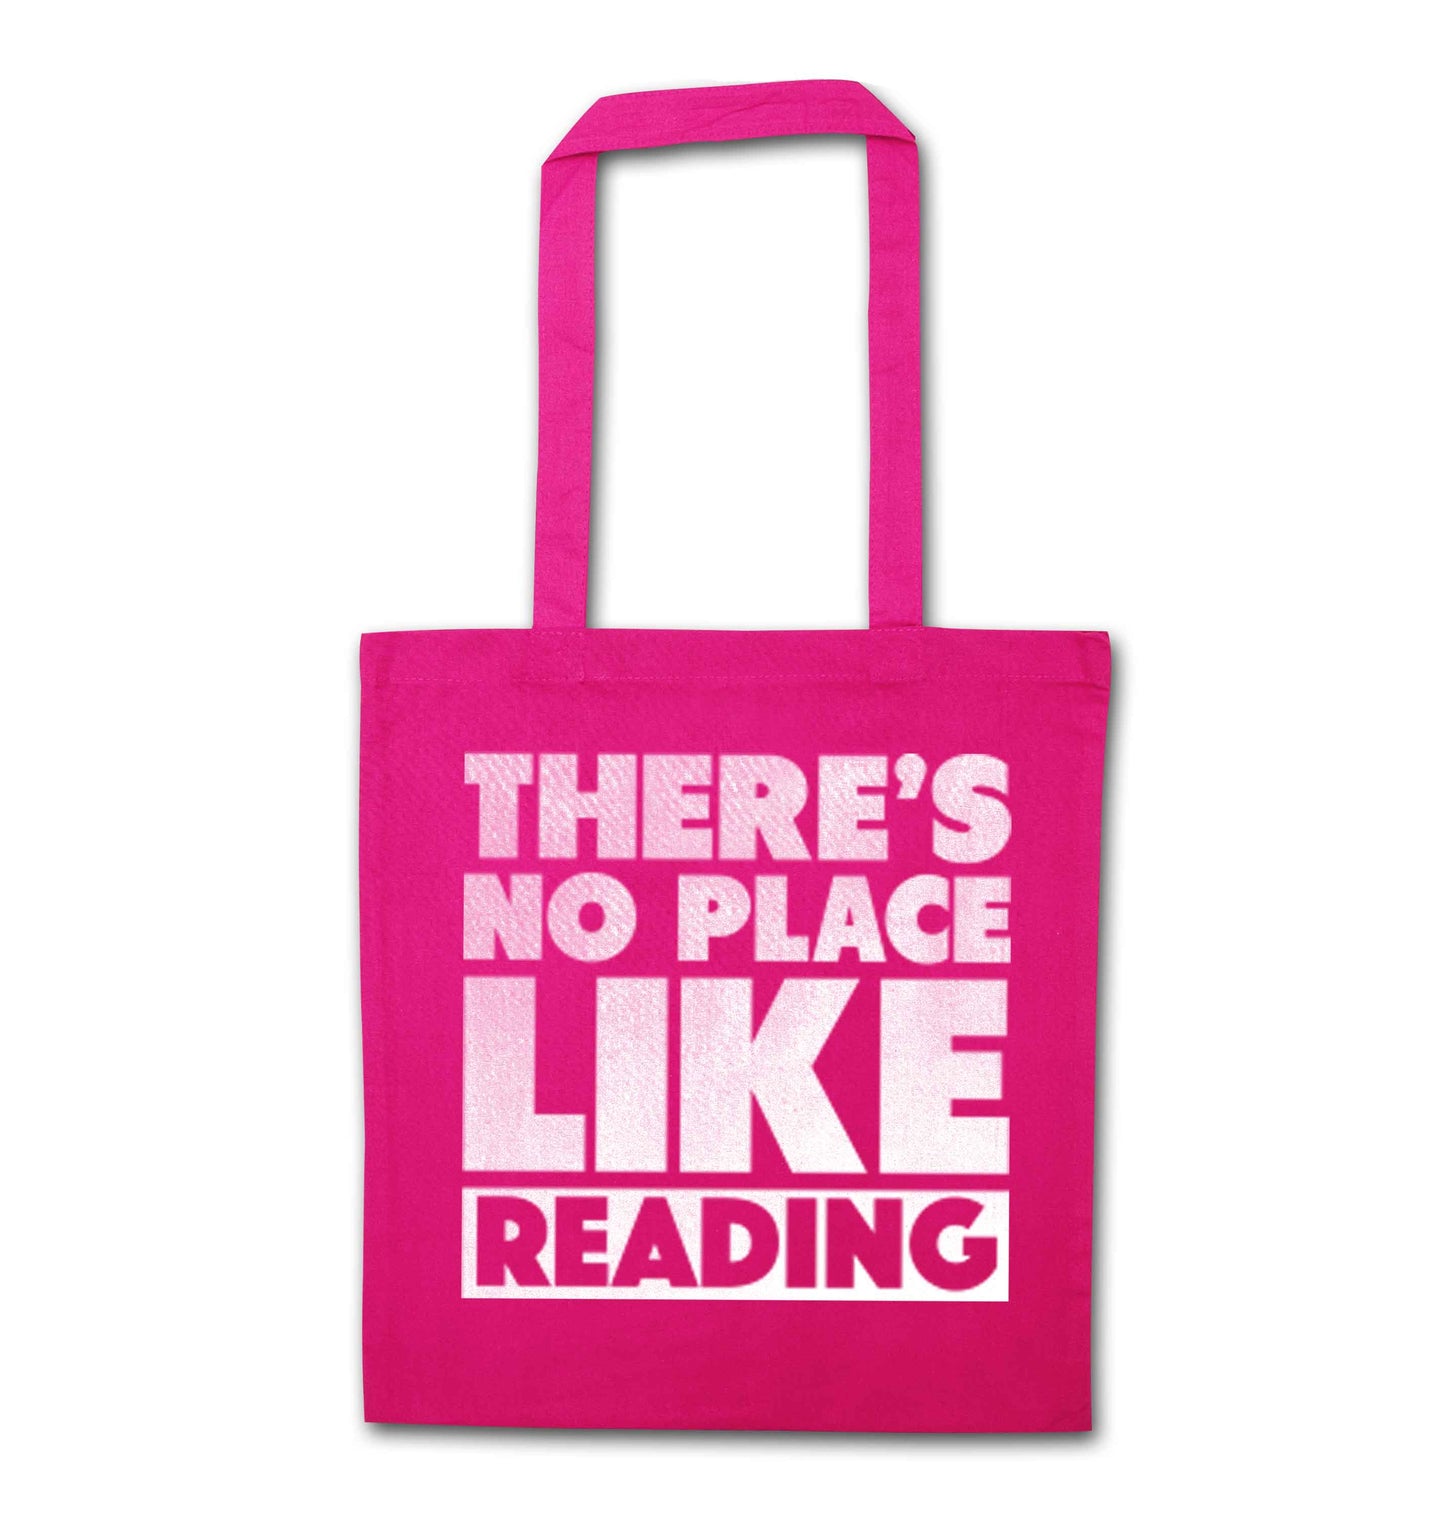 There's no place like Readingpink tote bag